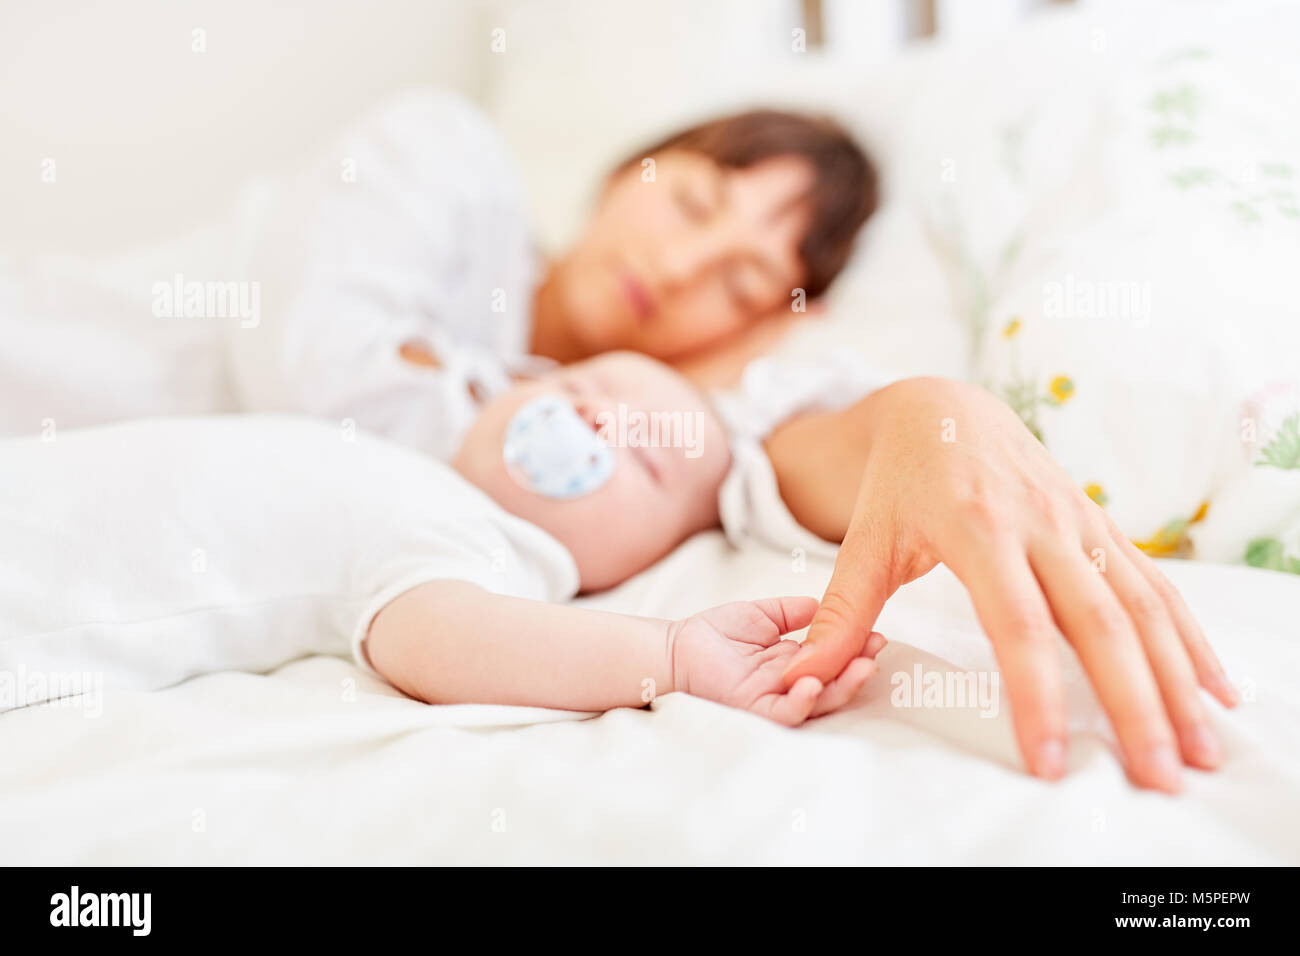 Big hand of mother and little hand of the baby are touching each other in sleep Stock Photo